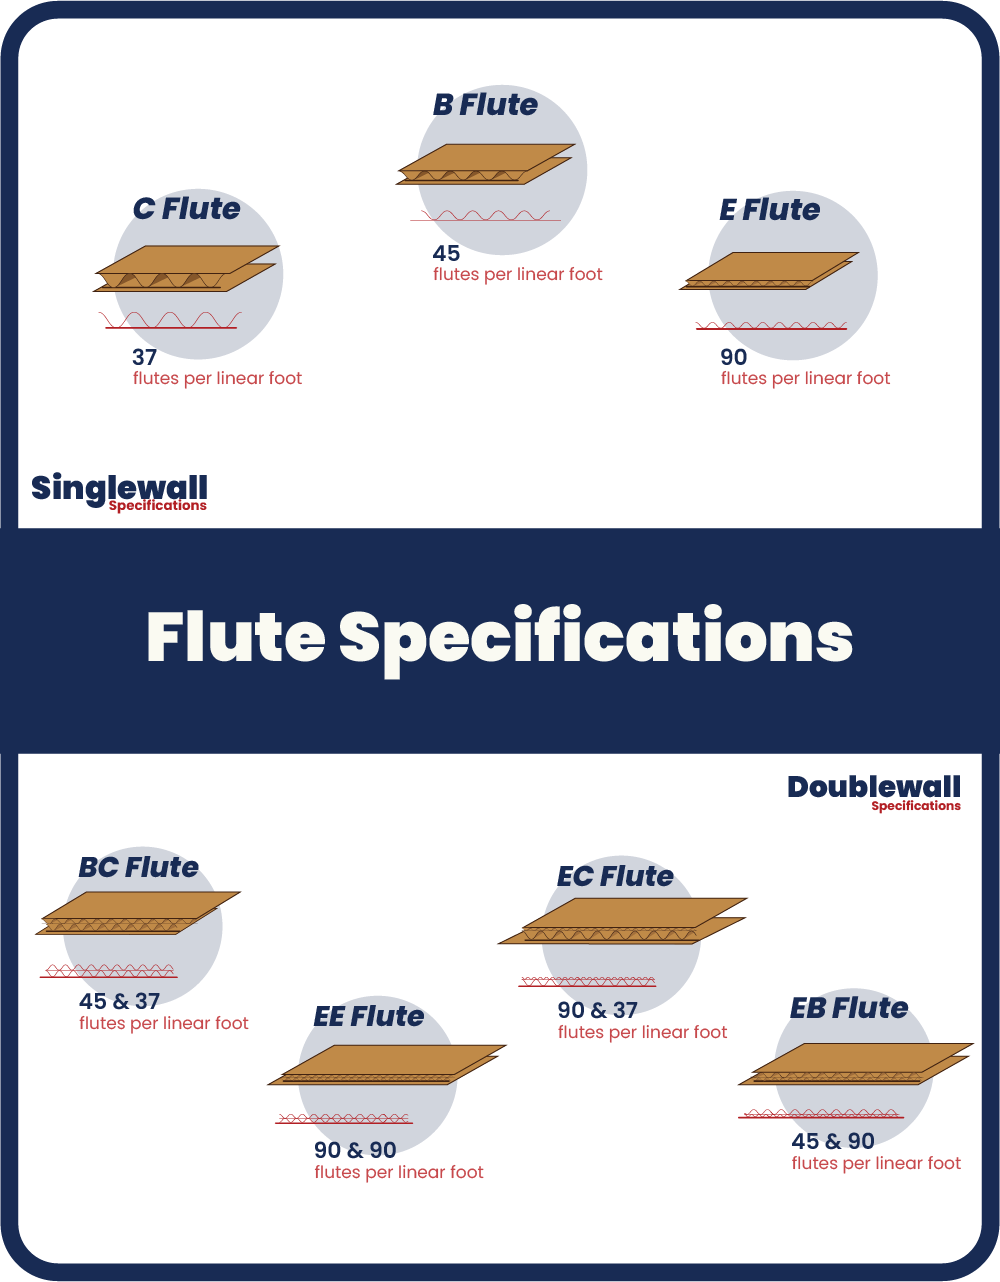 https://www.independencecorr.com/wp-content/uploads/2022/09/Independence-Flute-Specs1280NOfai21.png